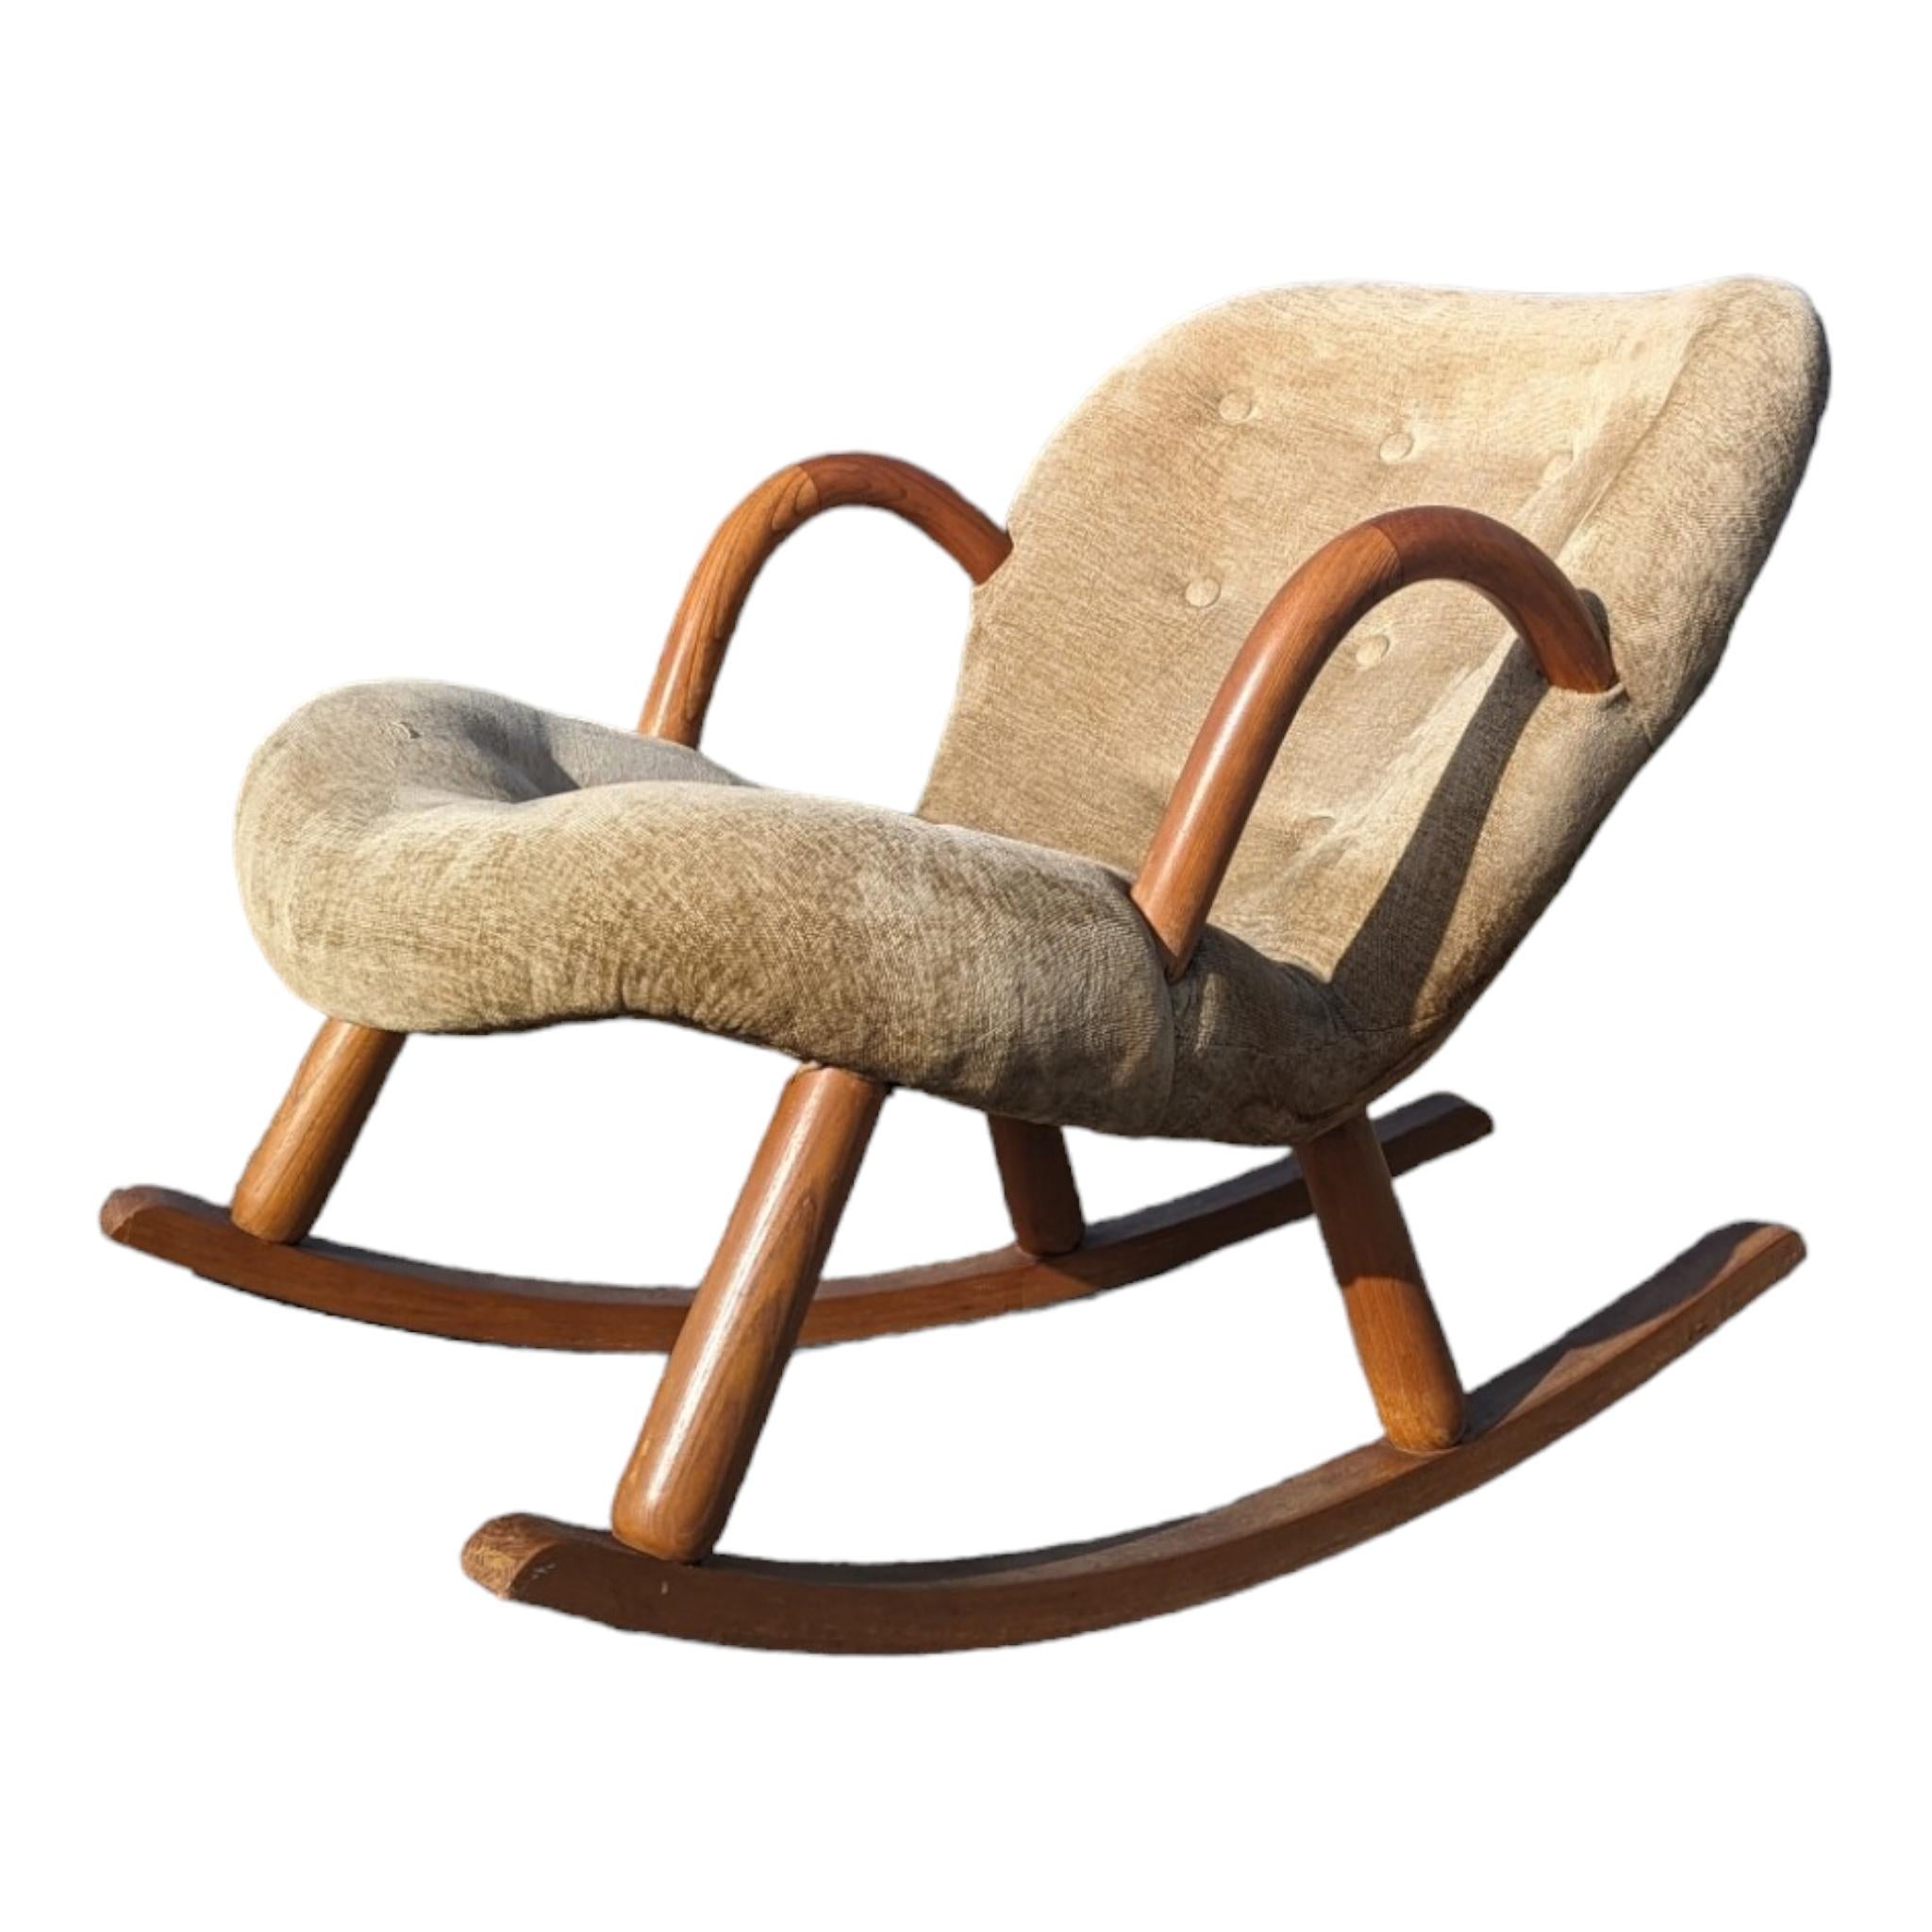 Rare Arnold Madsen Attributed Clam Rocking Chair circa 1960s For Sale 5